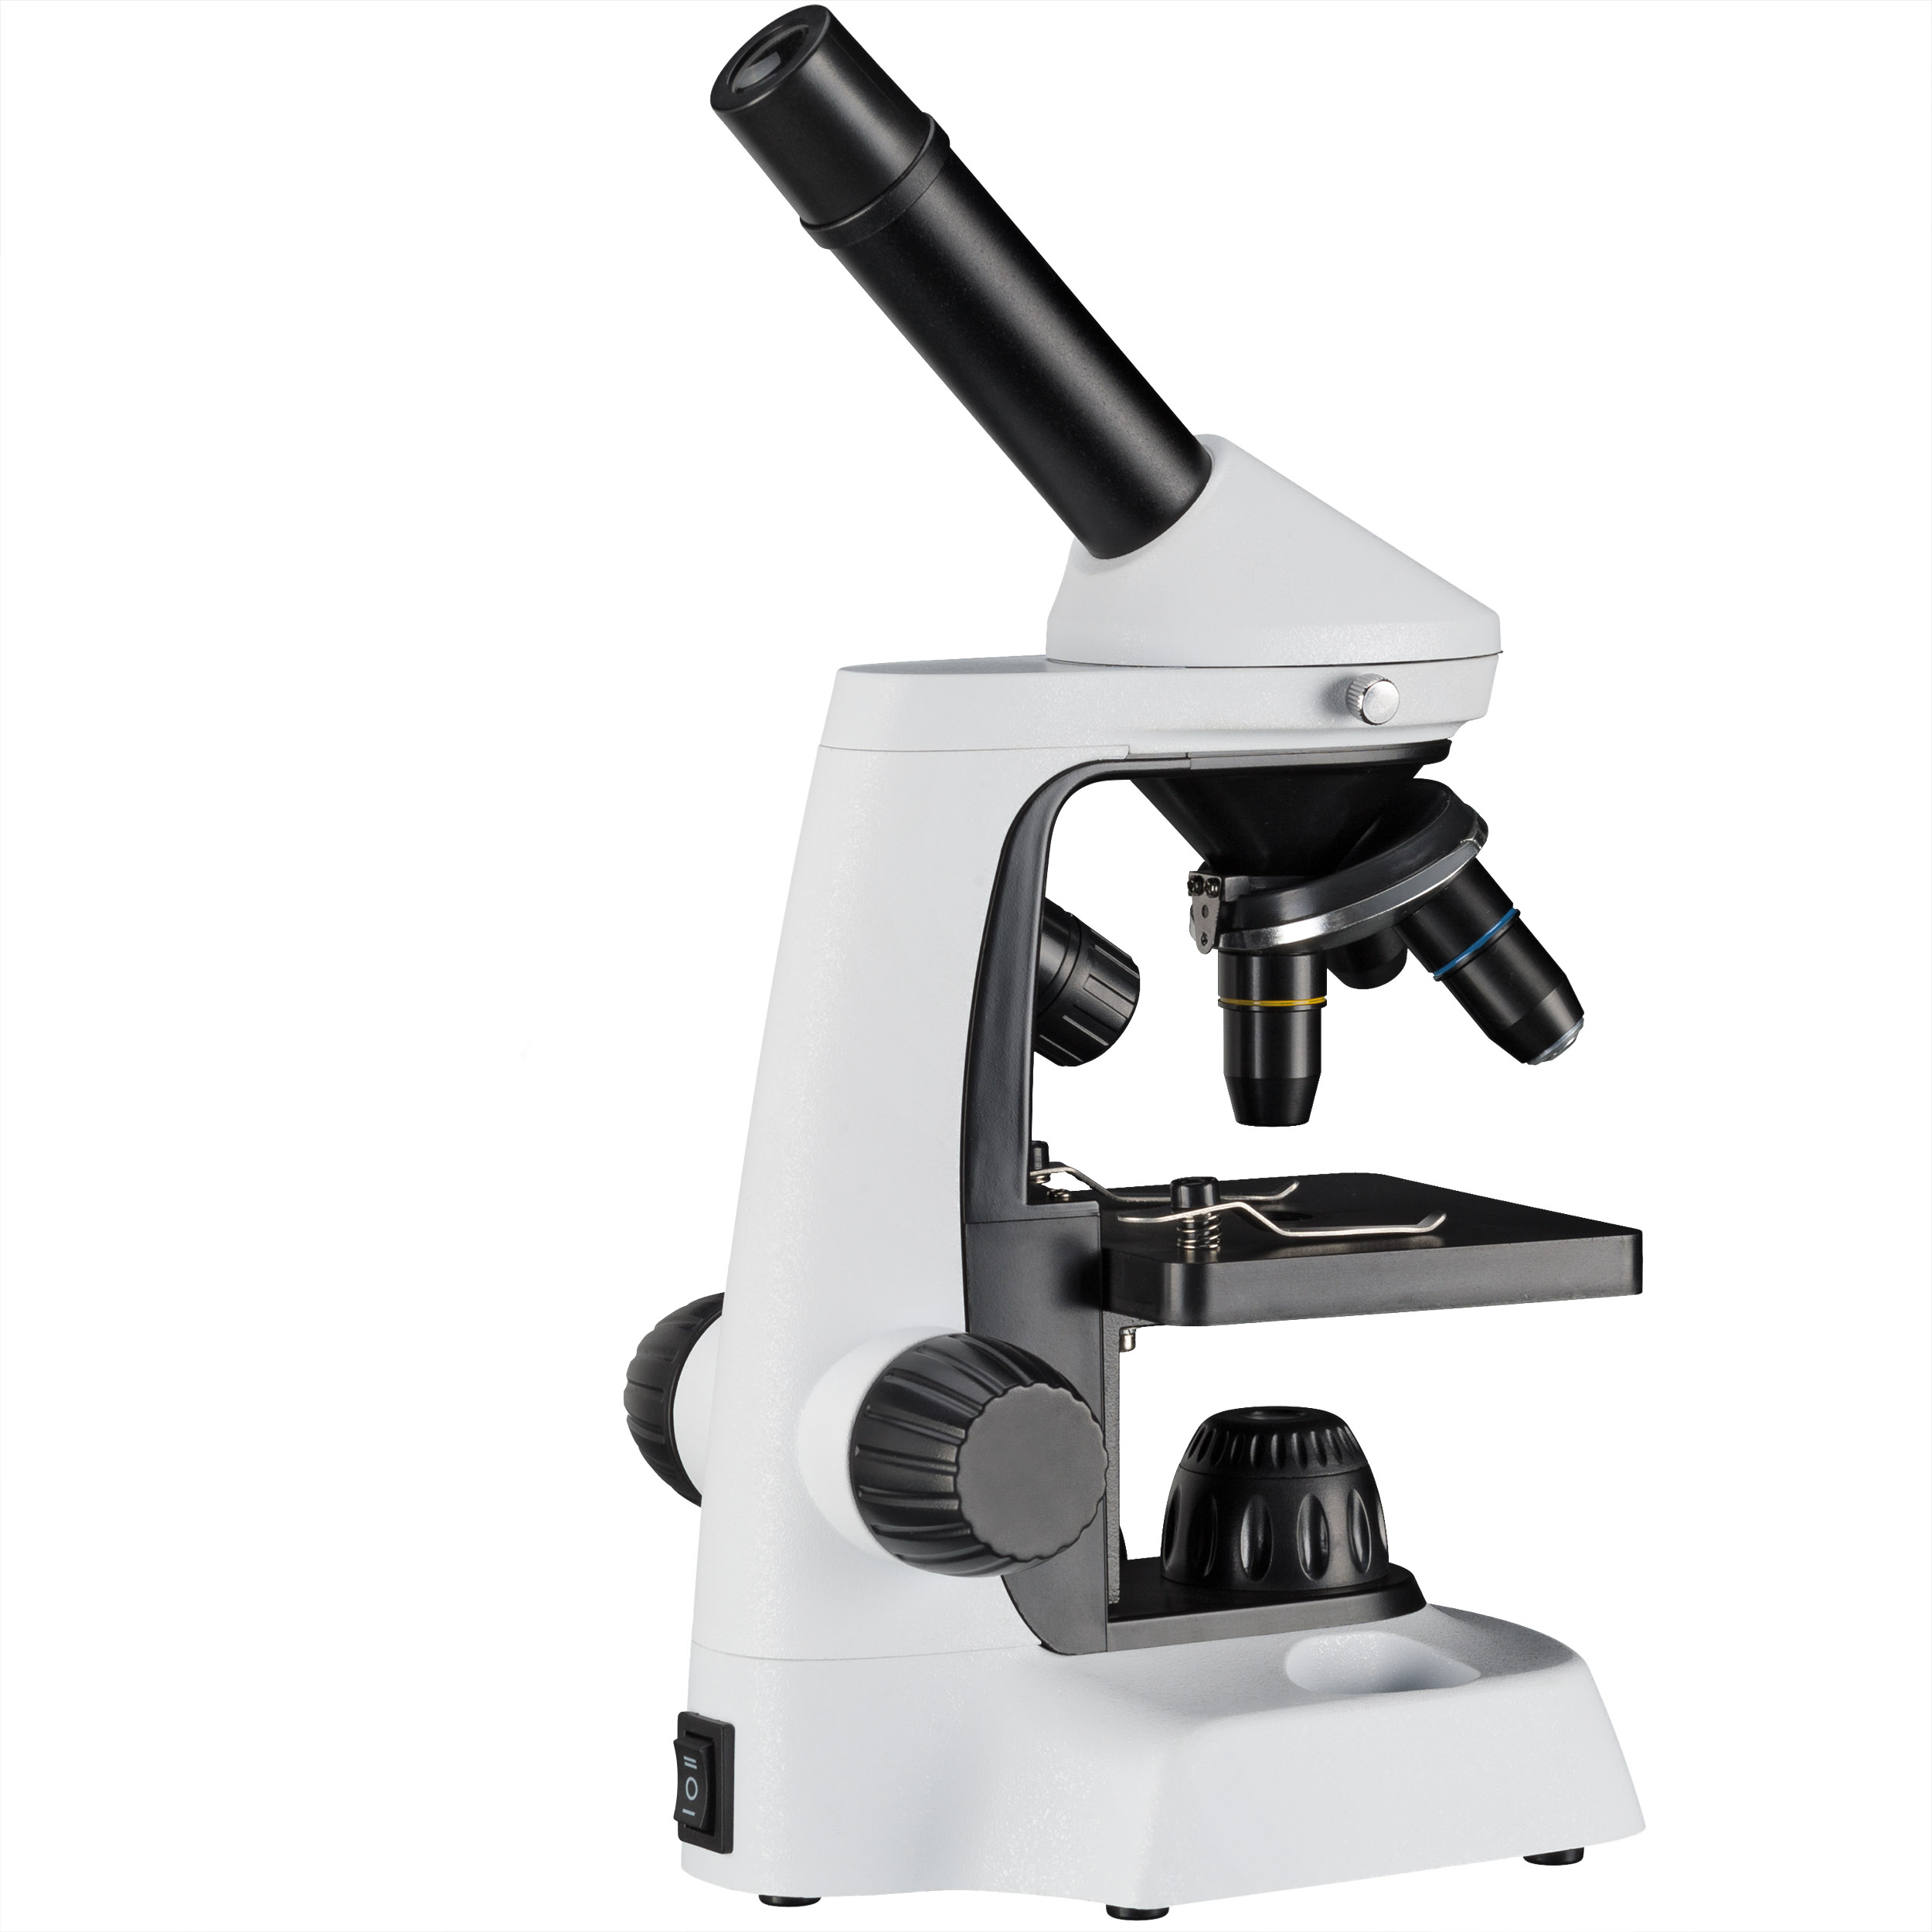 BRESSER JUNIOR Microscope with Magnification 40x-2000x